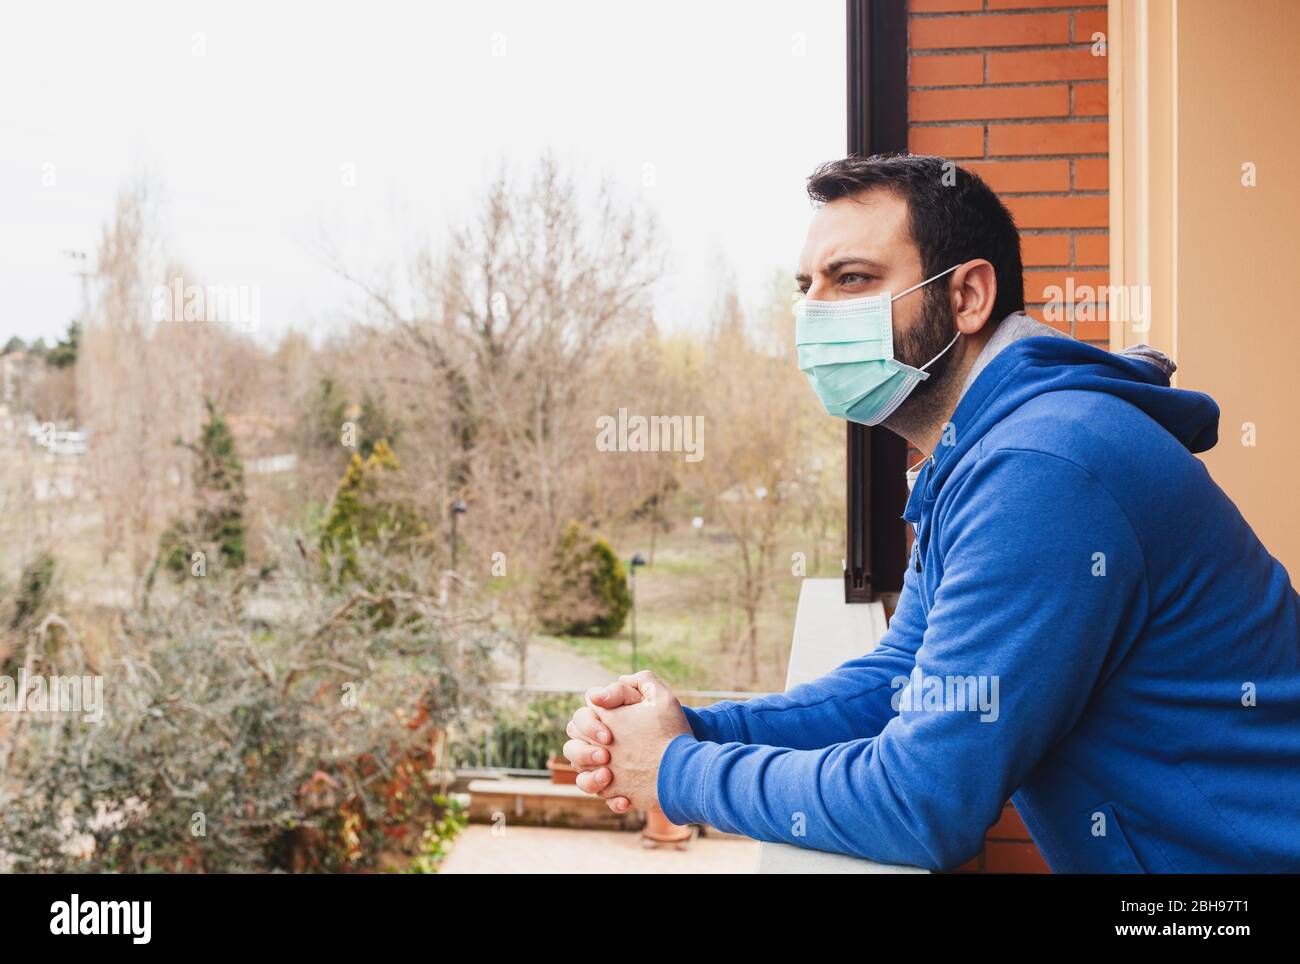 Young caucasian man with mask looking out onto home terrace during quarantine due to coronavirus covid19 pandemic. Stock Photo